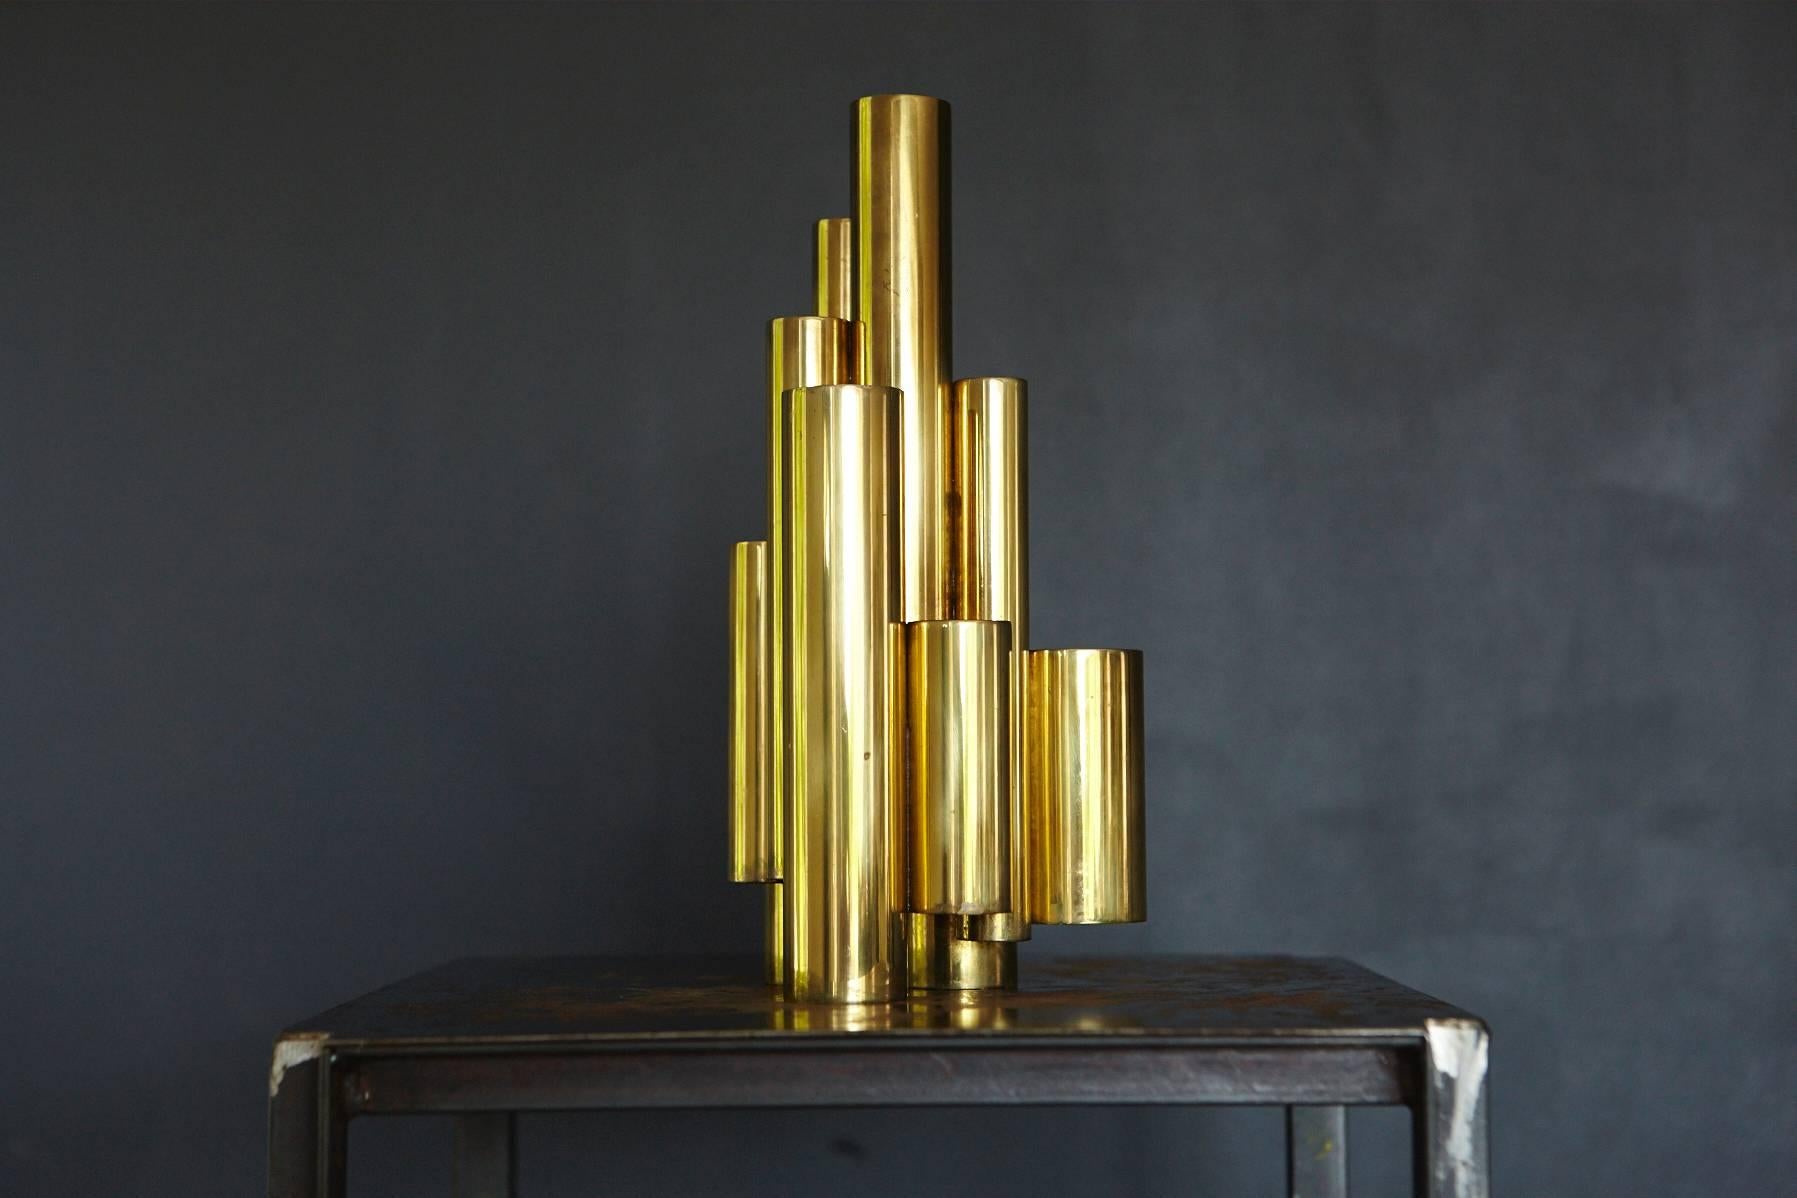 Mid-Century Modern Sculptural Tubular Brass Candleholder in the Style of Gio Ponti for 5 candles